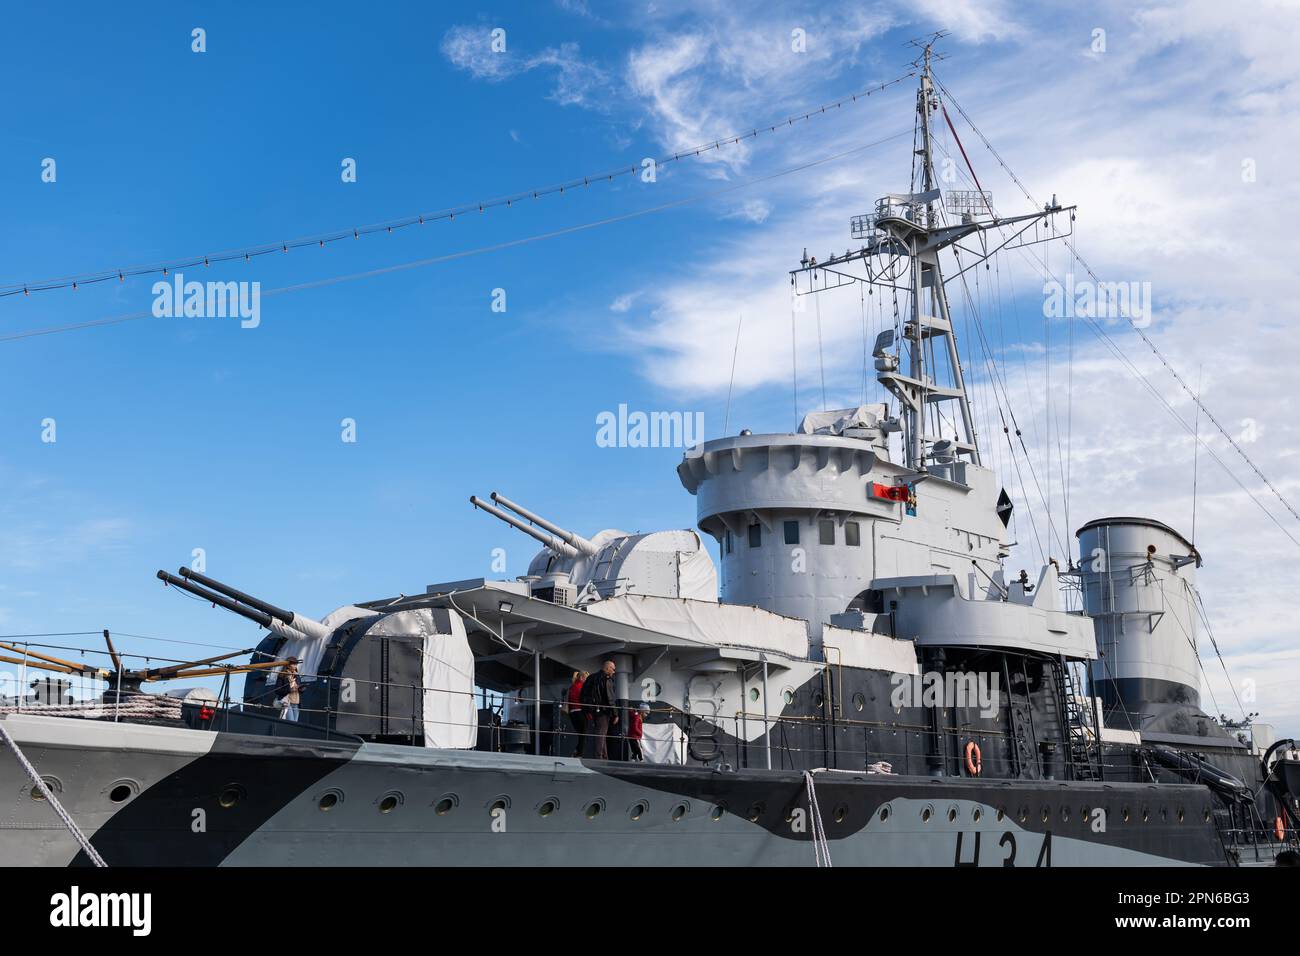 ORP Błyskawica (Lightning) in Port of Gdynia, Poland. Grom-class destroyer warship of the Polish Navy which served during the World War II. Museum shi Stock Photo